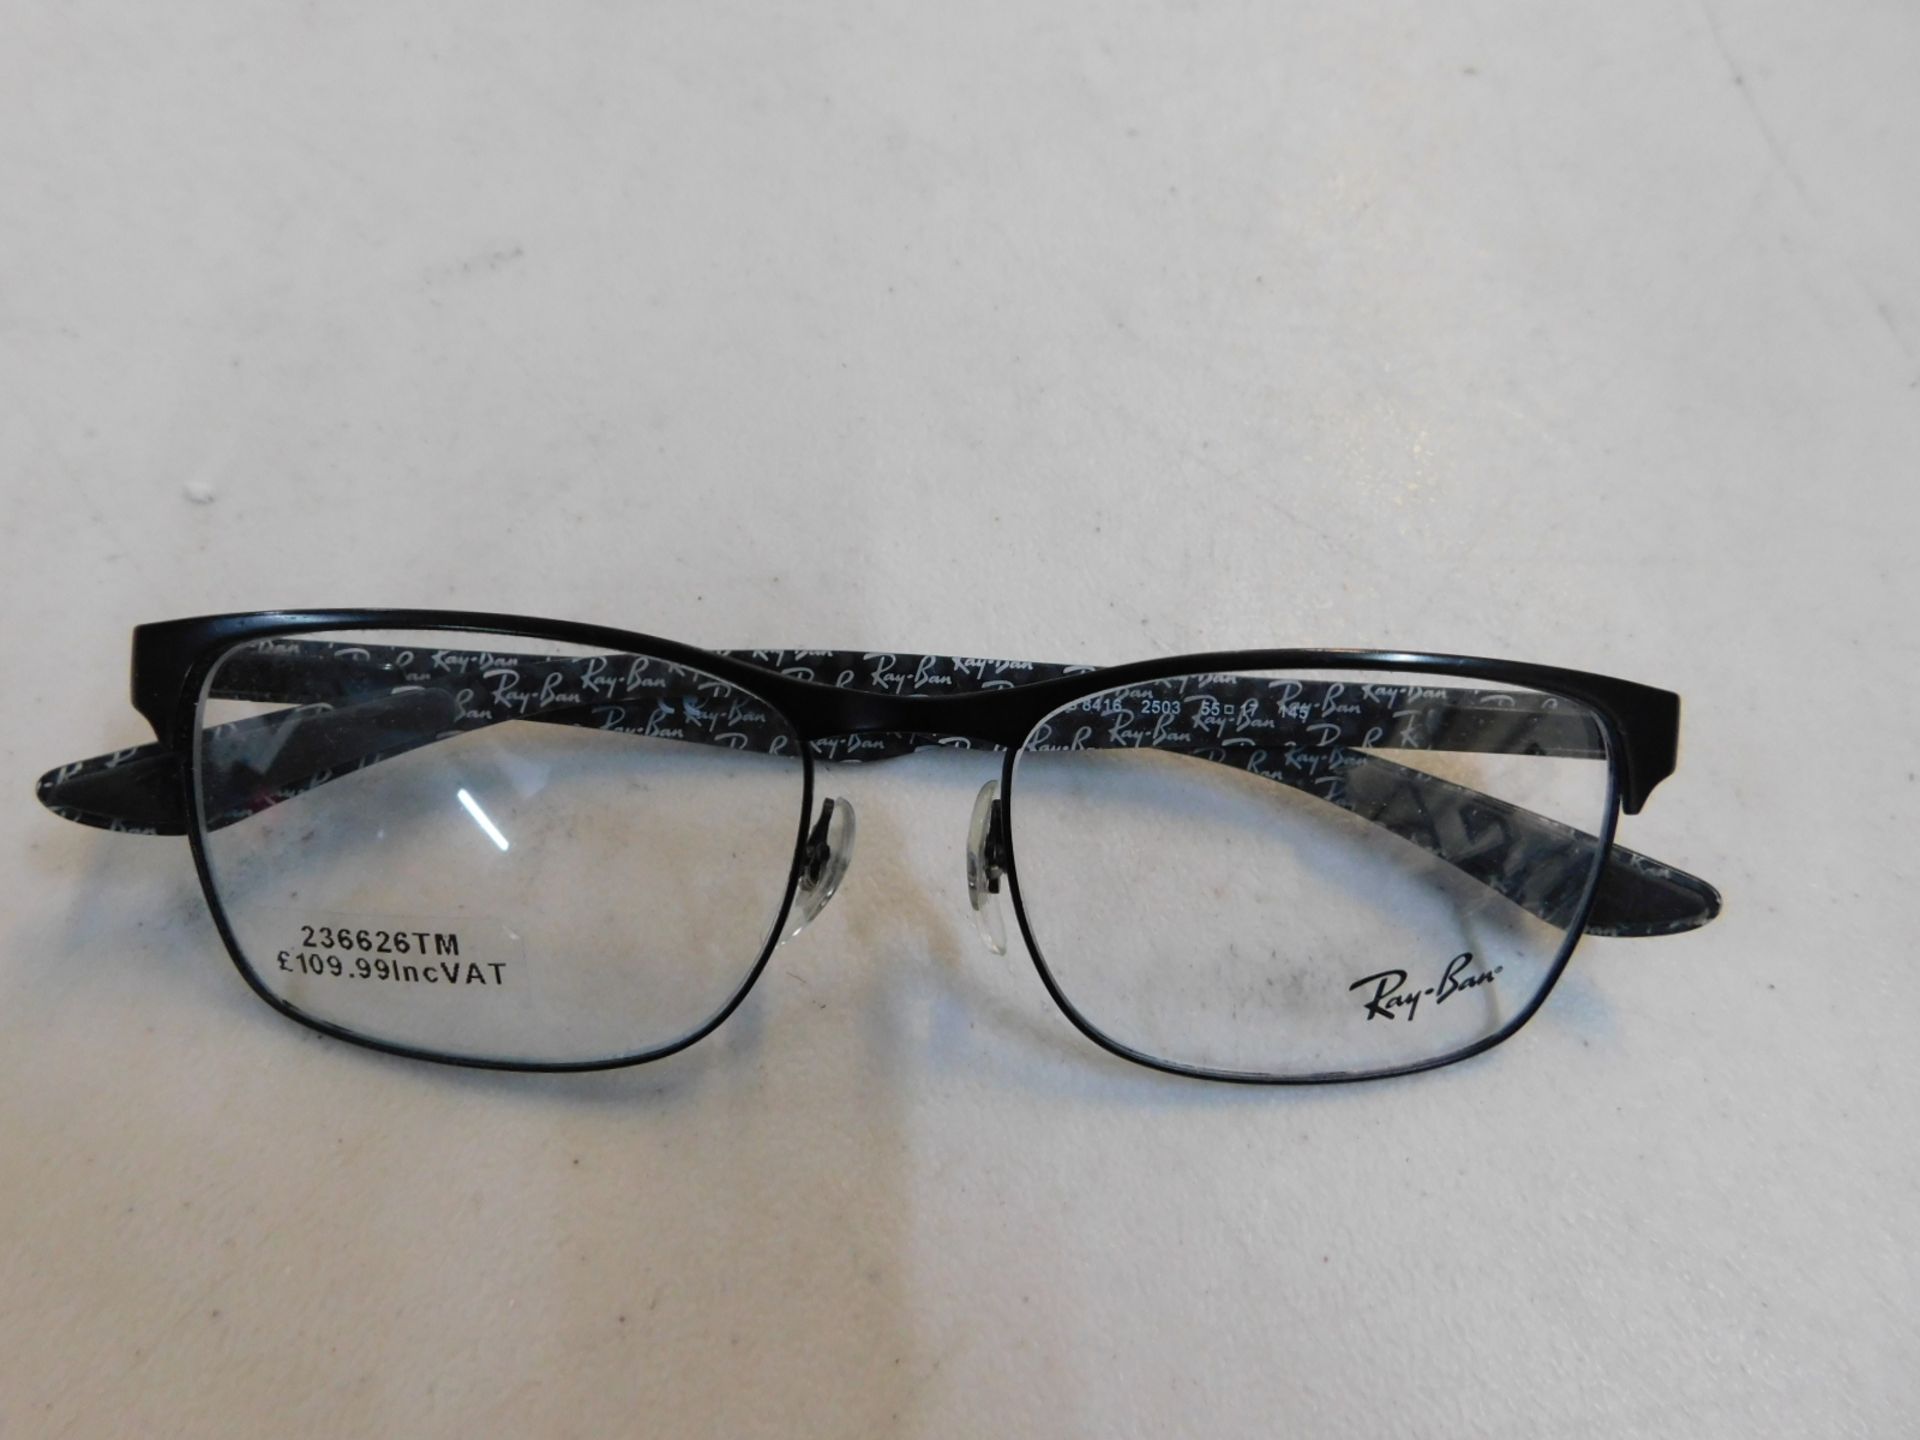 1 PAIR OF RAY-BAN GLASSES FRAME MODEL RB8416 RRP Â£119